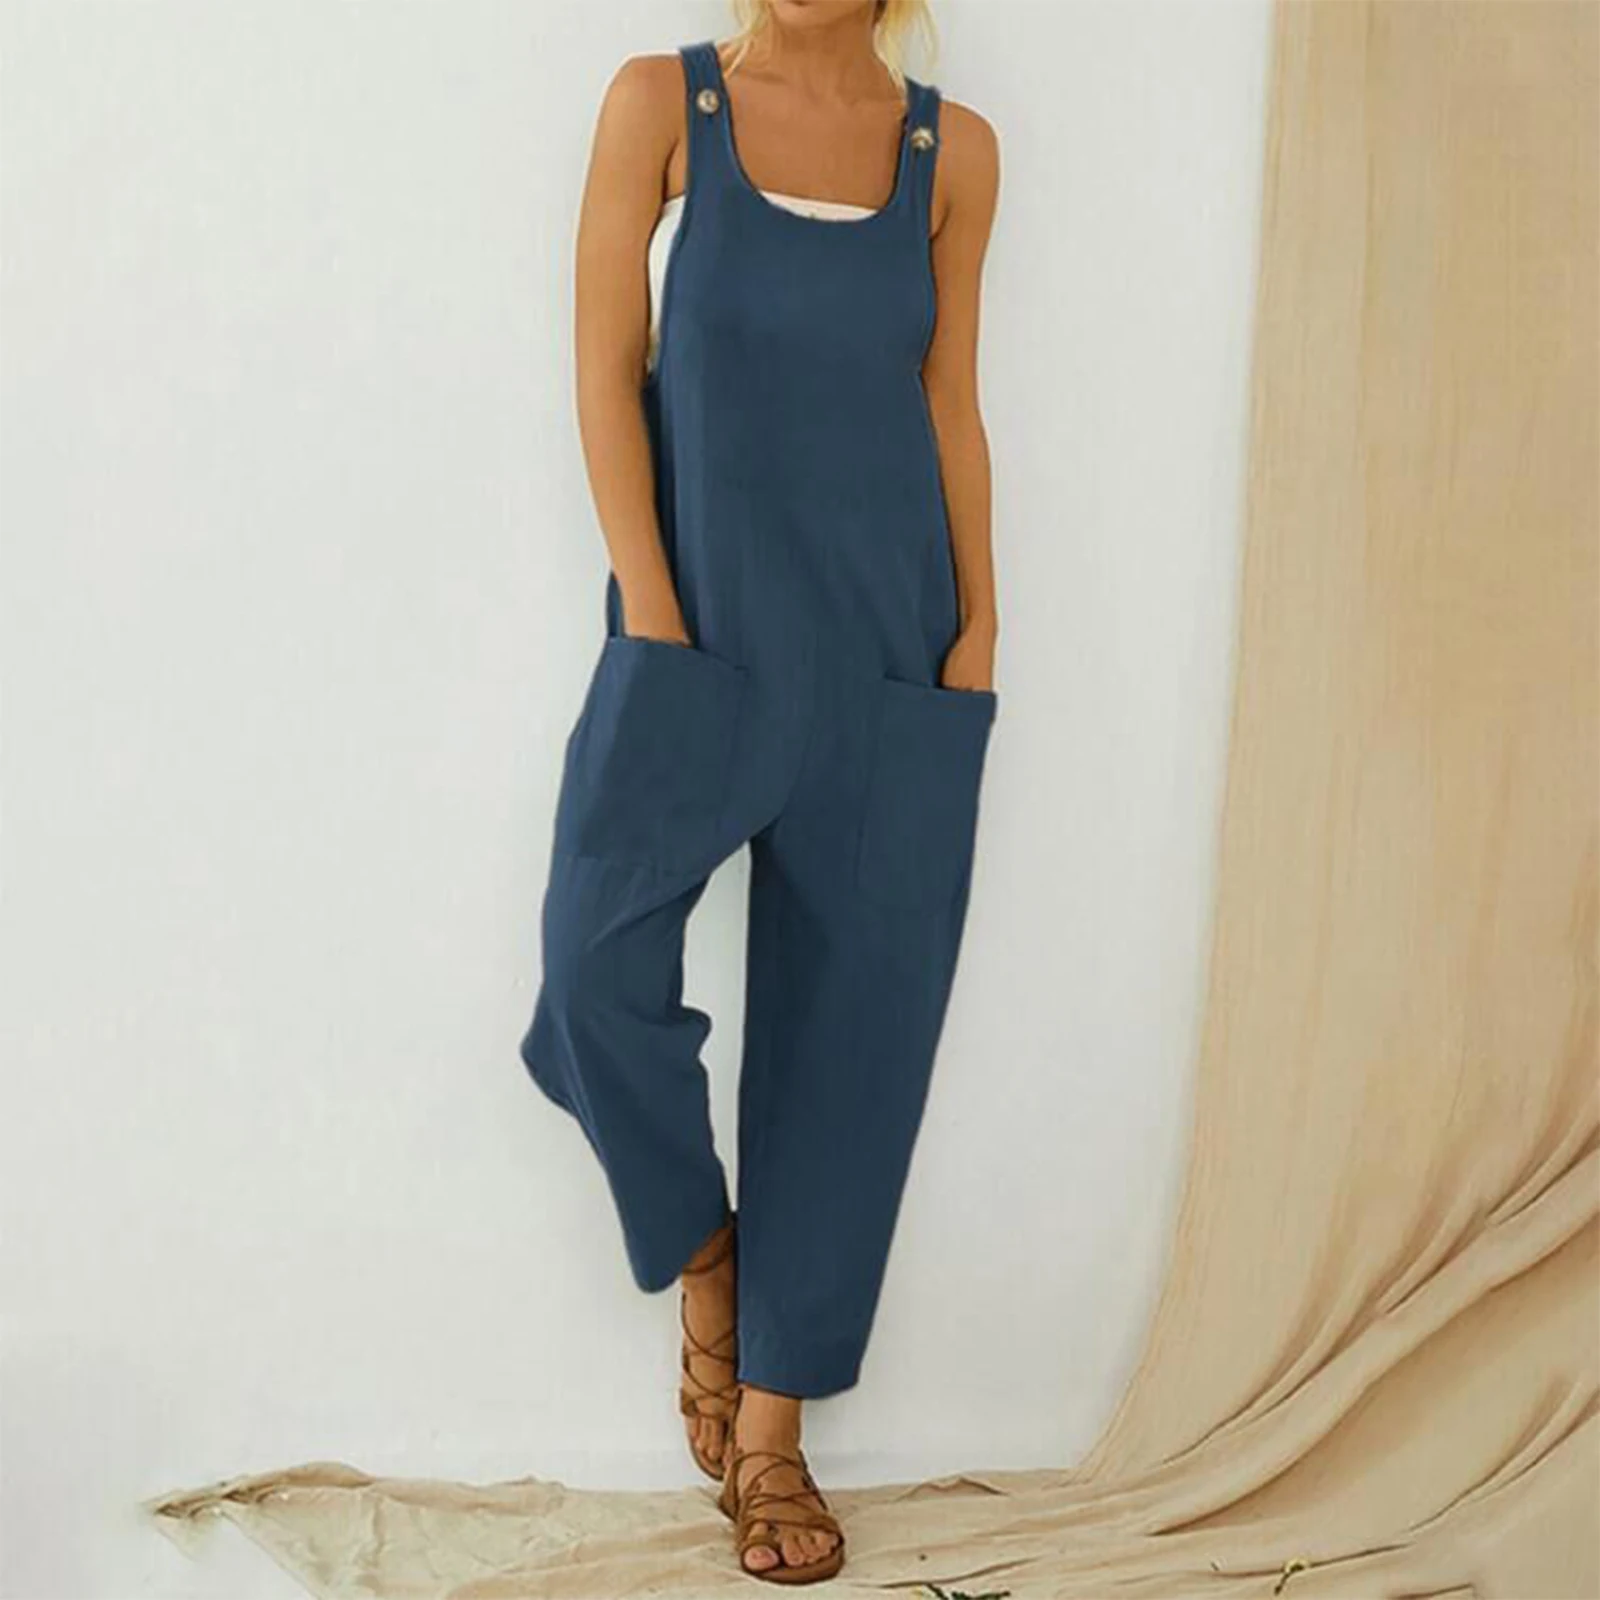 Women Loose Style Jumpsuit 2021 Summer Solid Color U-shaped Collar Sleeveless Overalls with Pockets S/ M/ L/ XL/ XXL plus size womens clothing